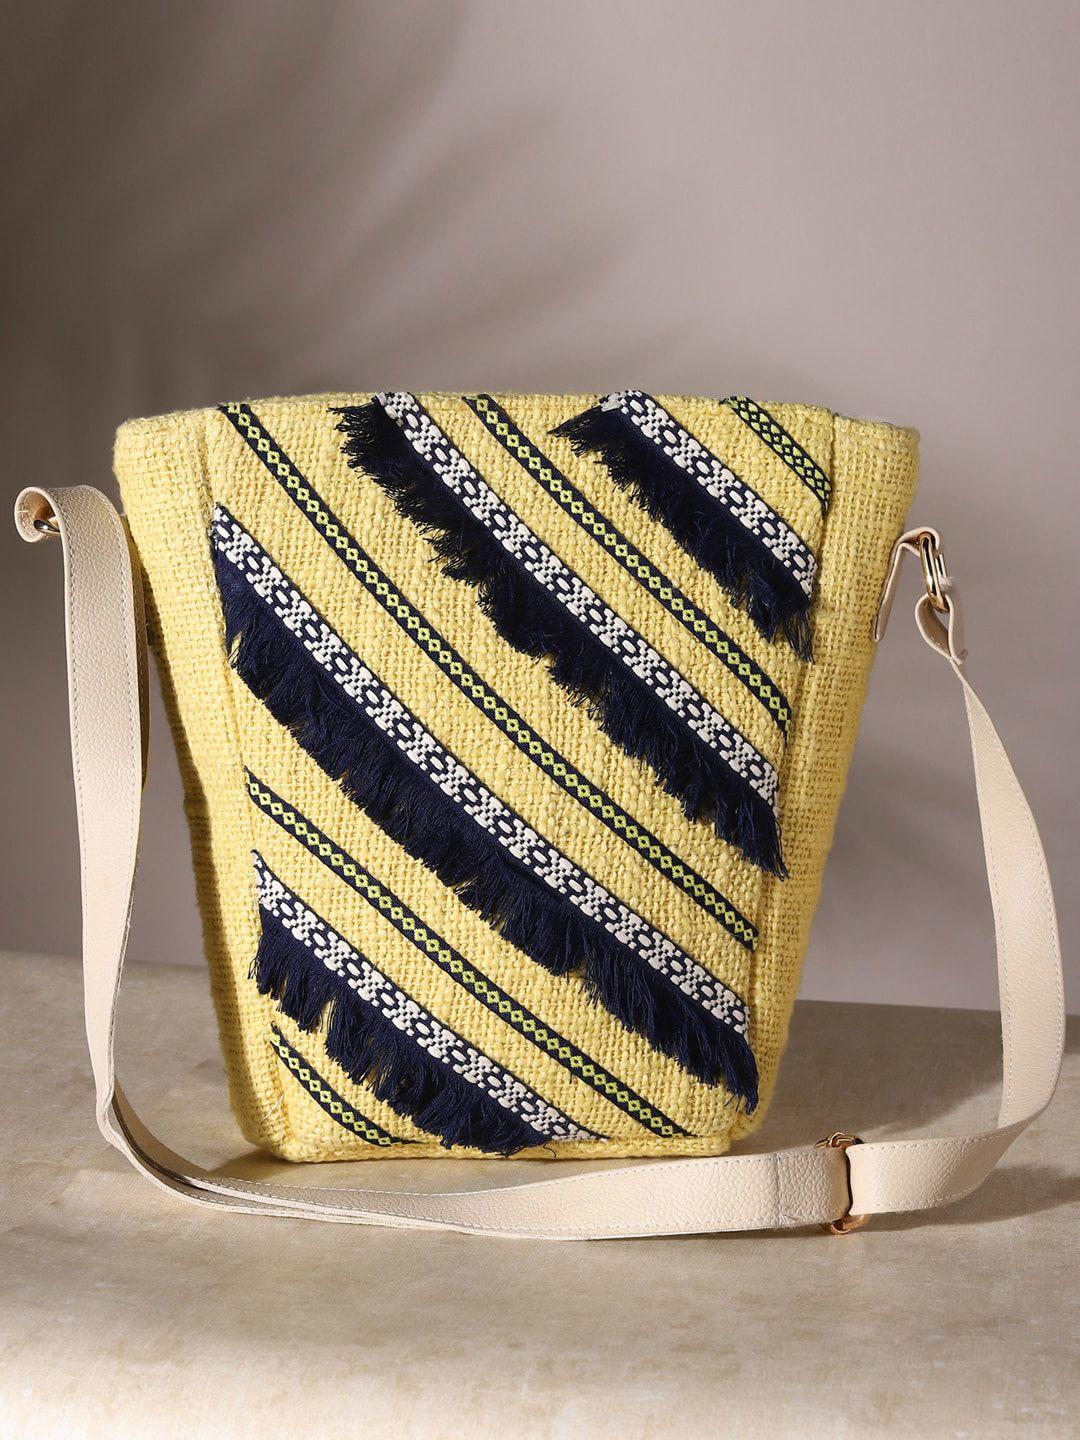 deebaco lime green structured sling bag with tasselled